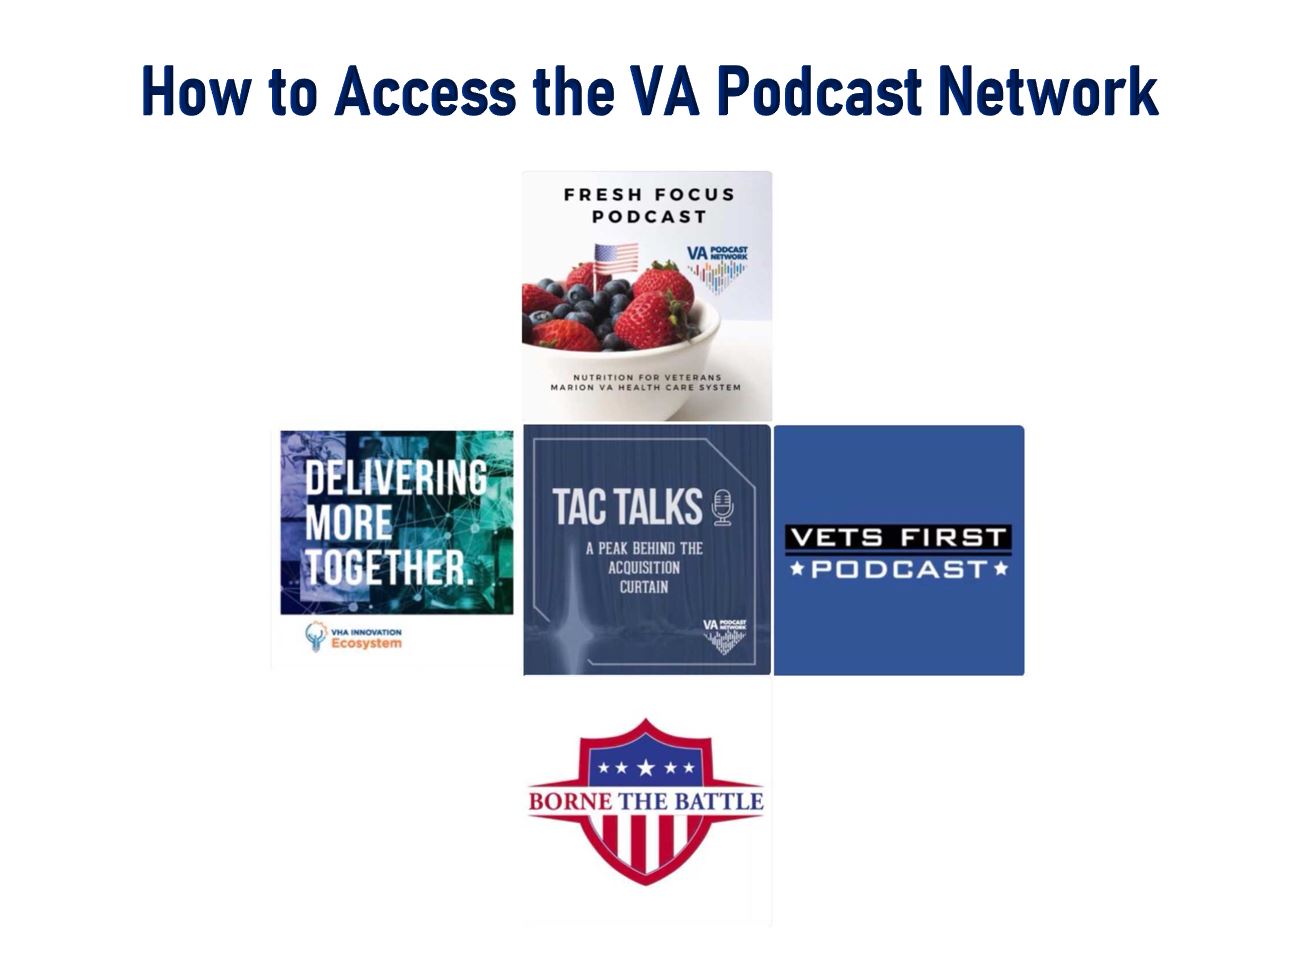 How to access the VA Podcast Network